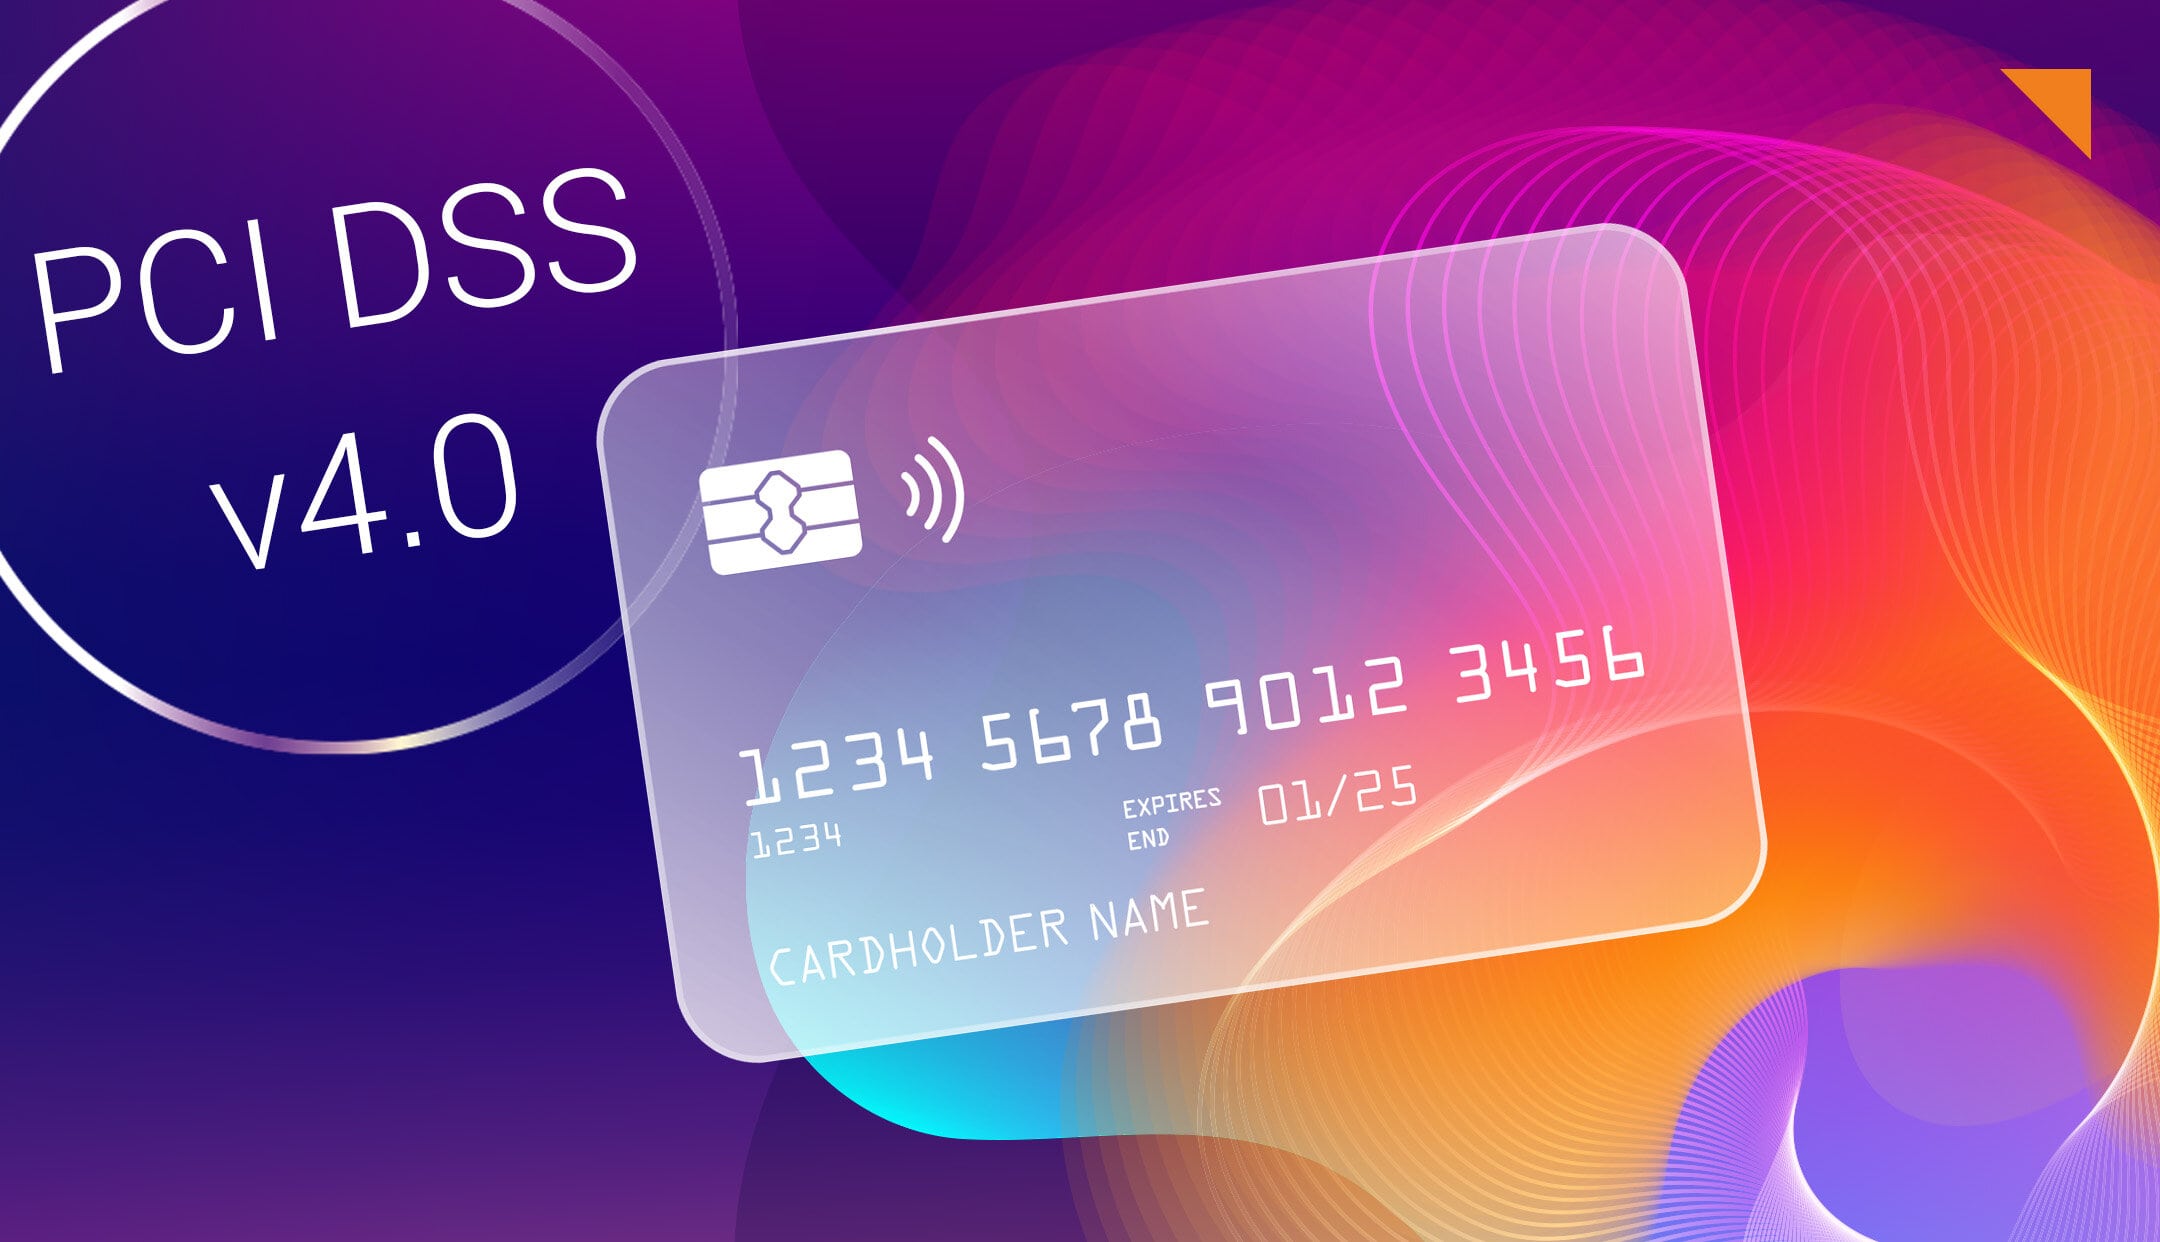 PCI DSS v4.0: The Transition Phase Is Over. What Will Change for You?